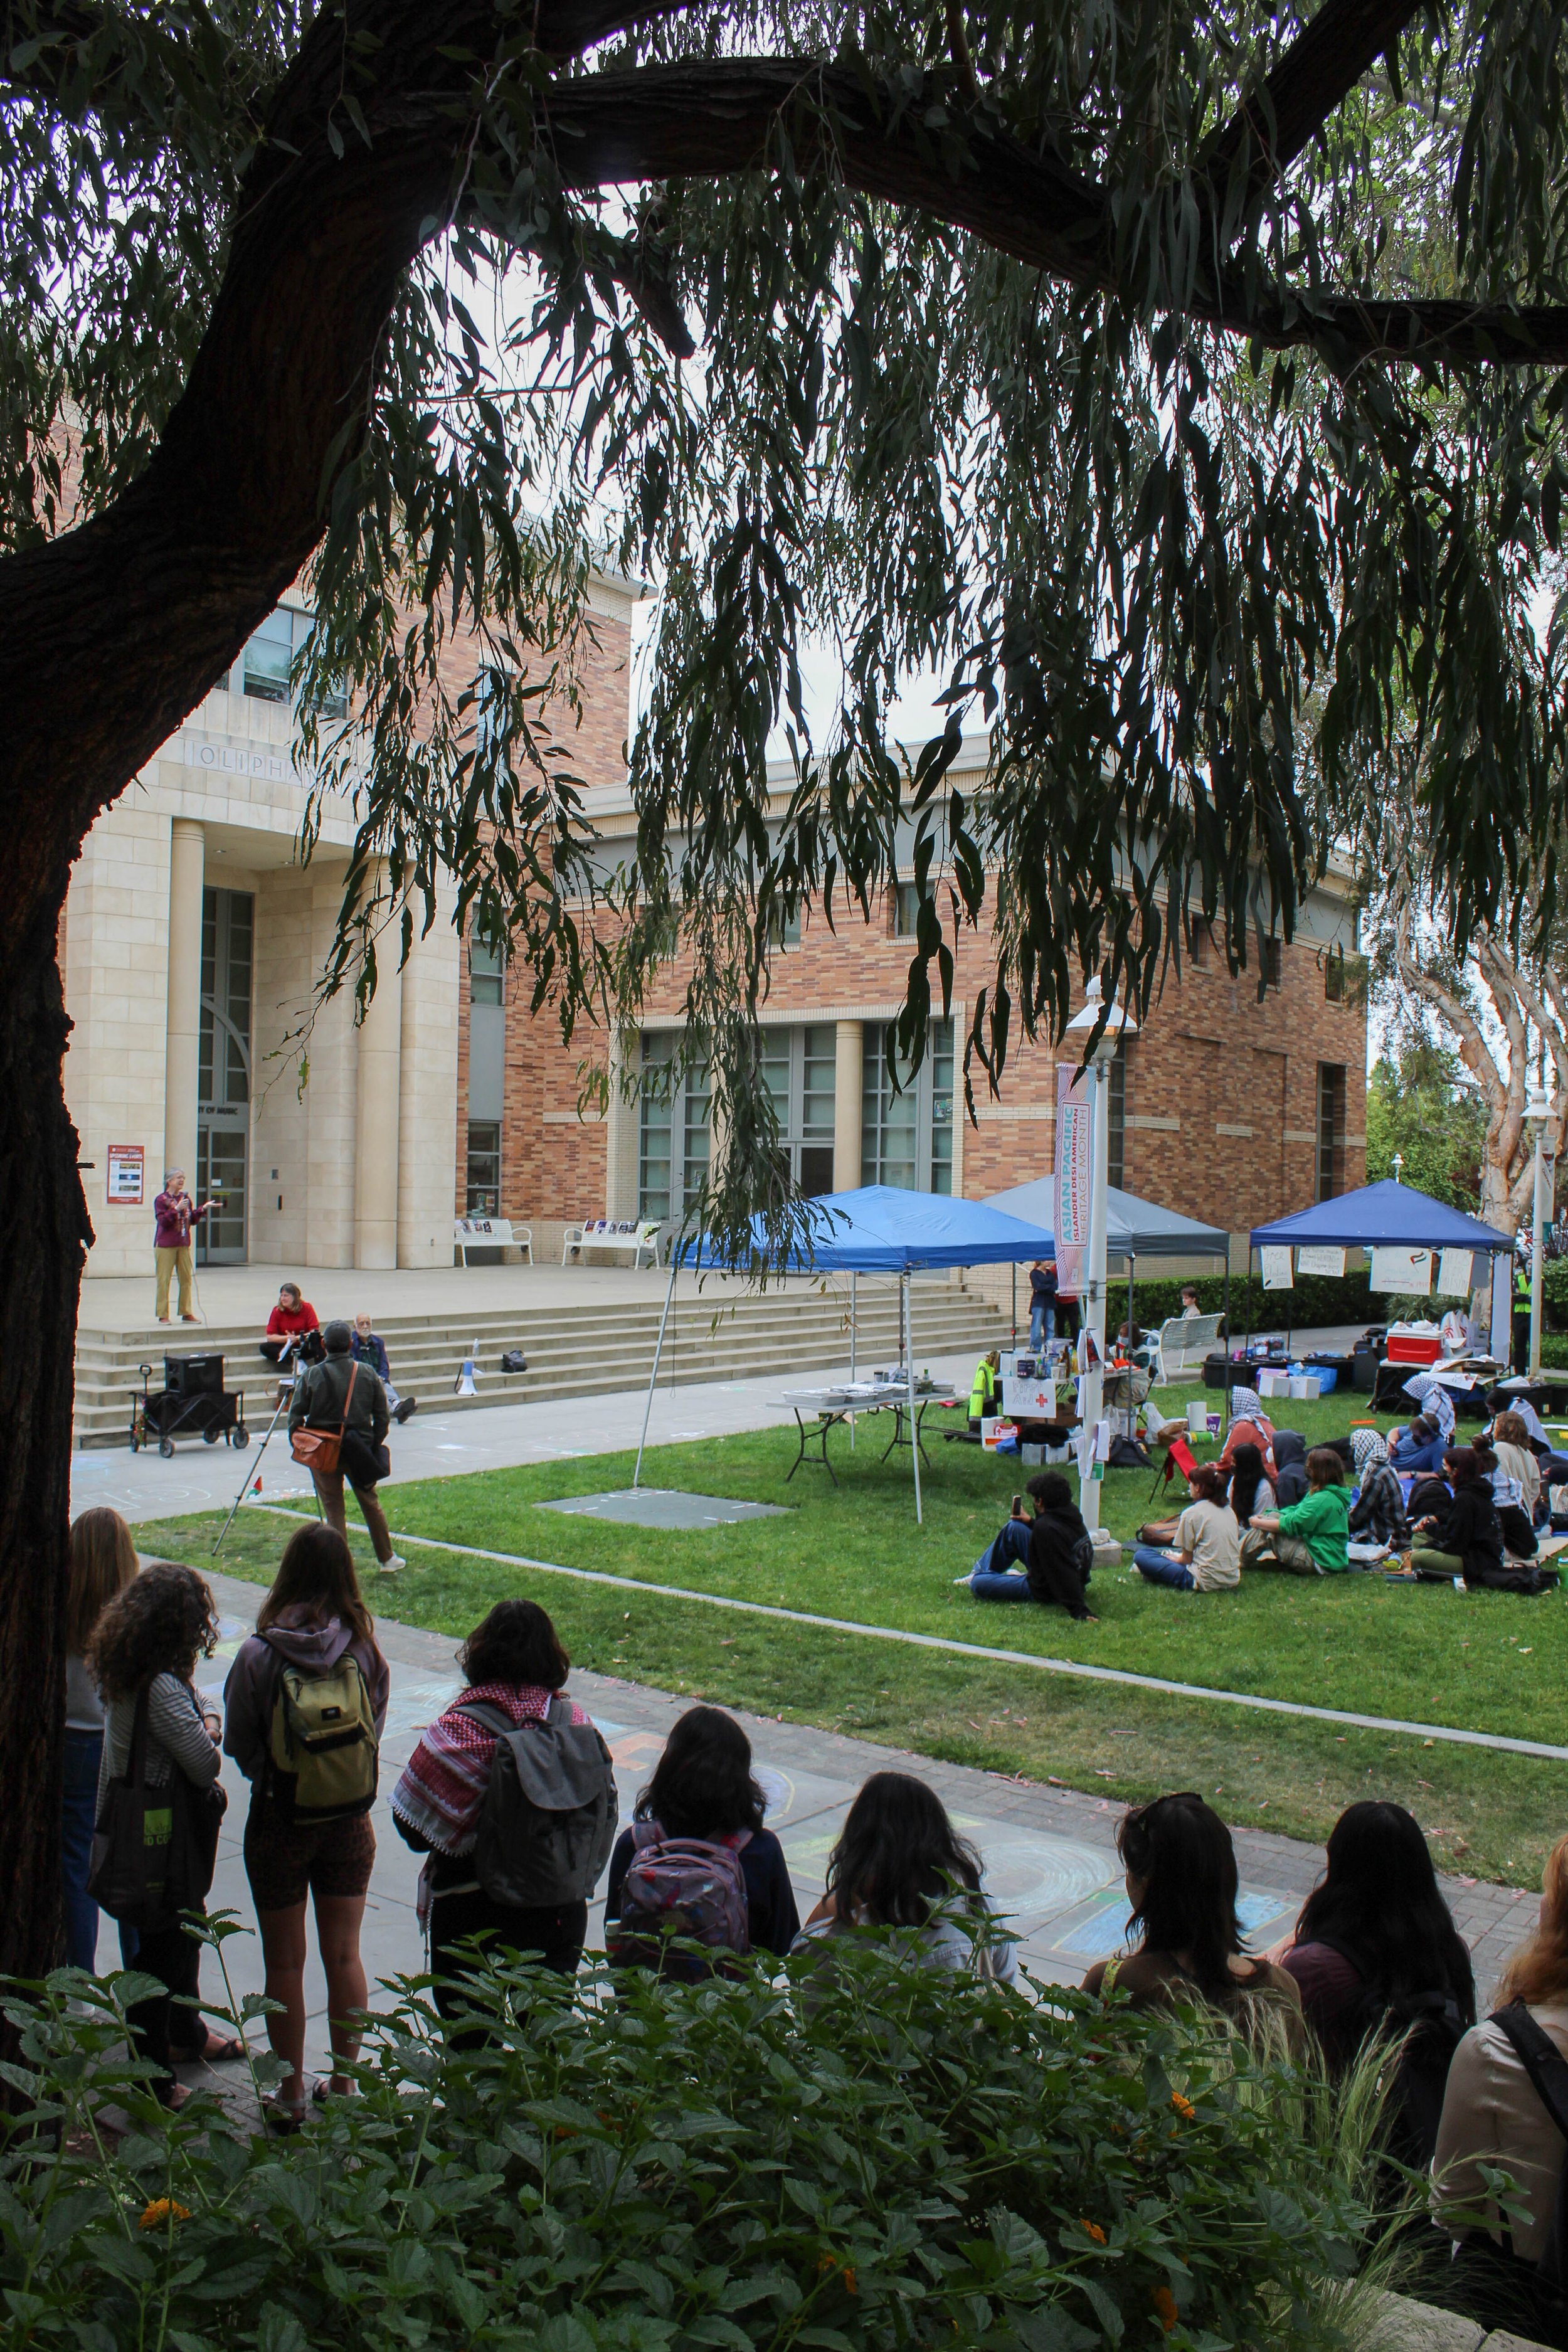    Attendees listened to faculty speakers on the first day of the encampment. Photo by RENEE ELEFANTE, Editor-in-Chief   